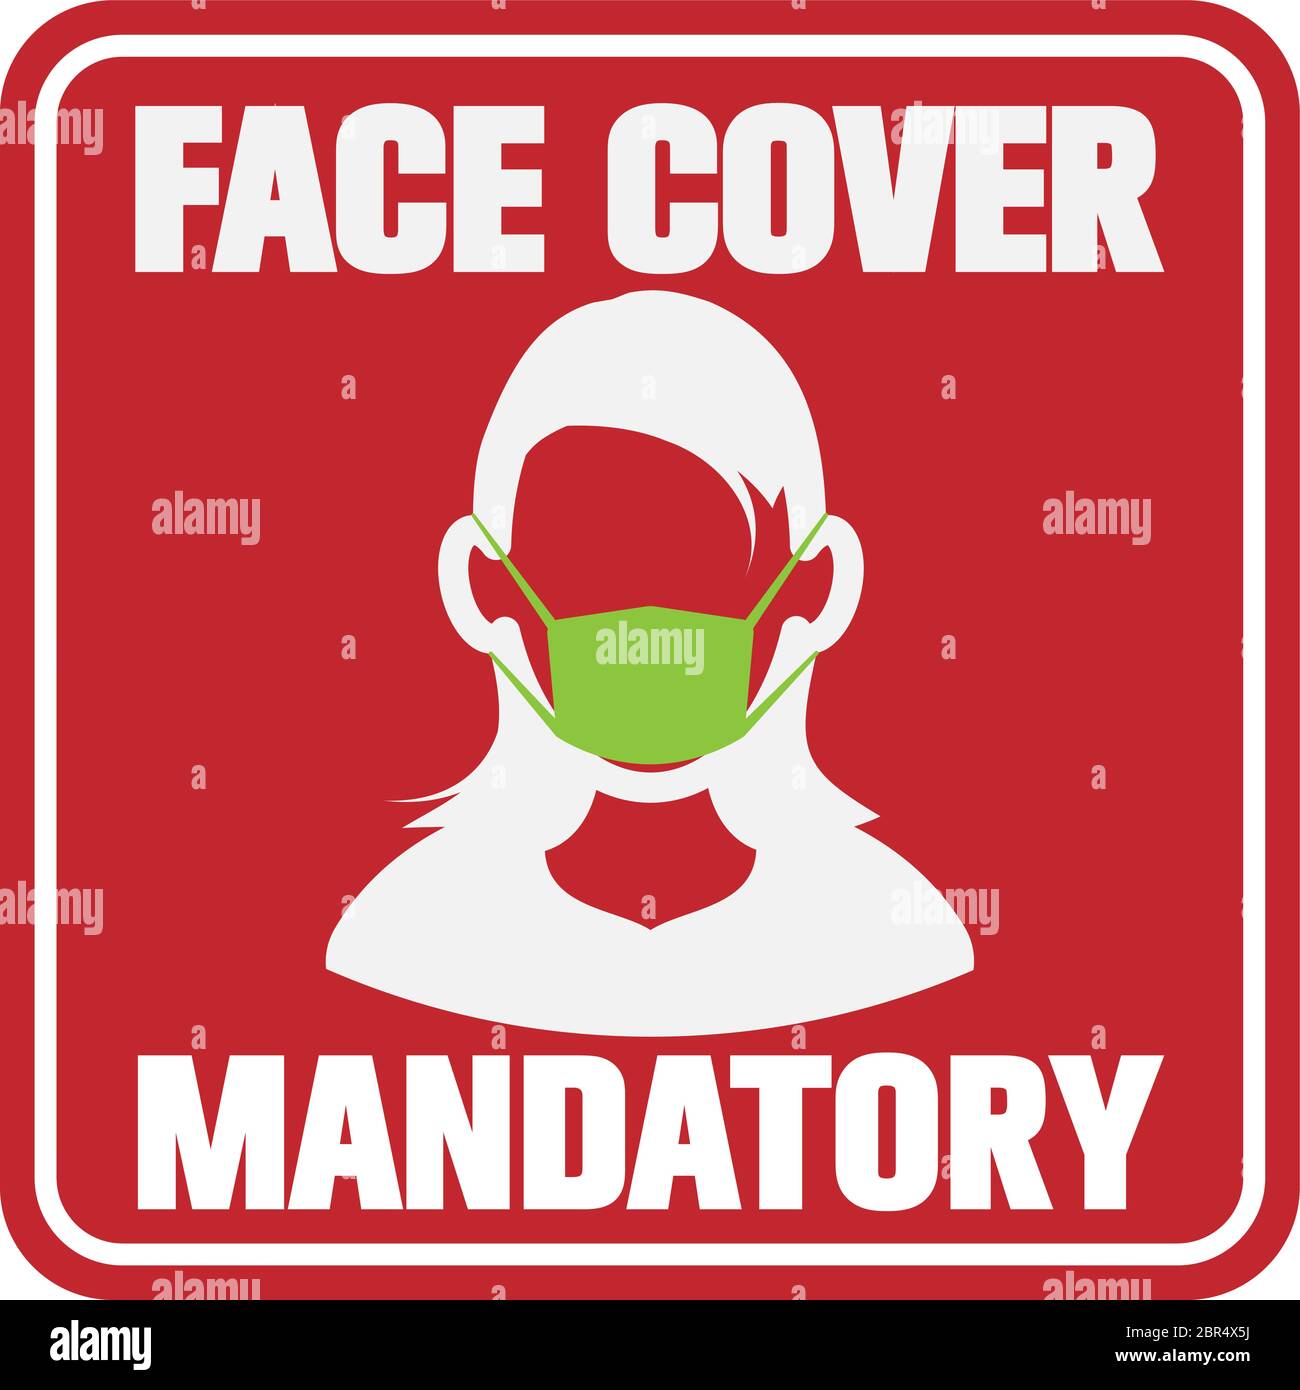 do not enter without face cover sign, face masks mandatory vector illustration Stock Vector